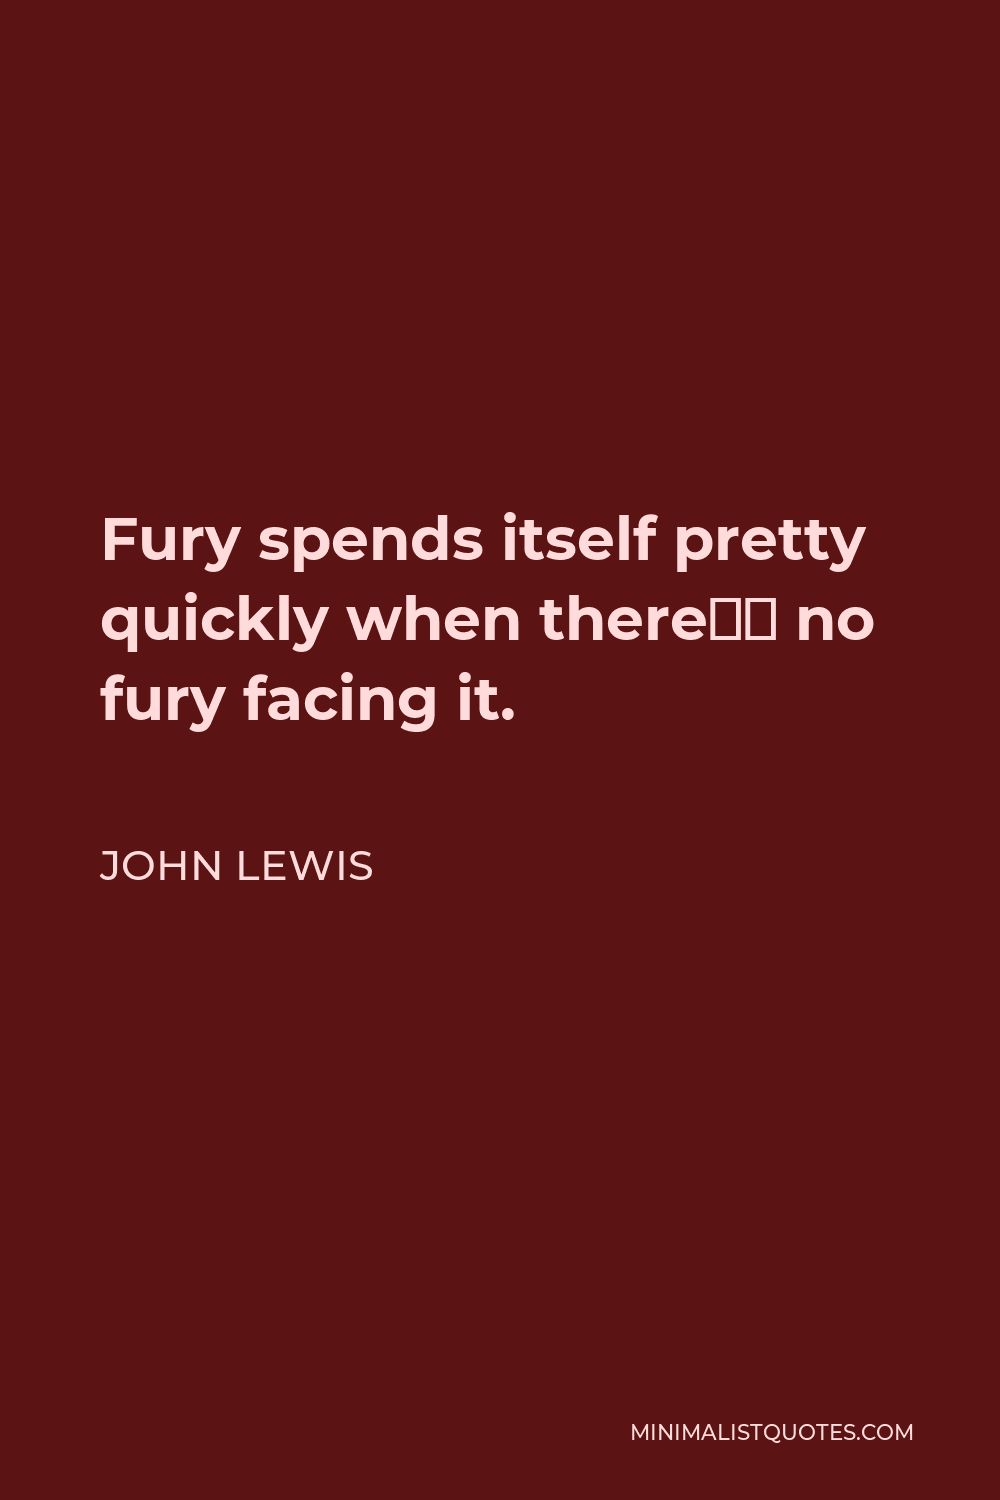 John Lewis Quote - Fury spends itself pretty quickly when there’s no fury facing it.